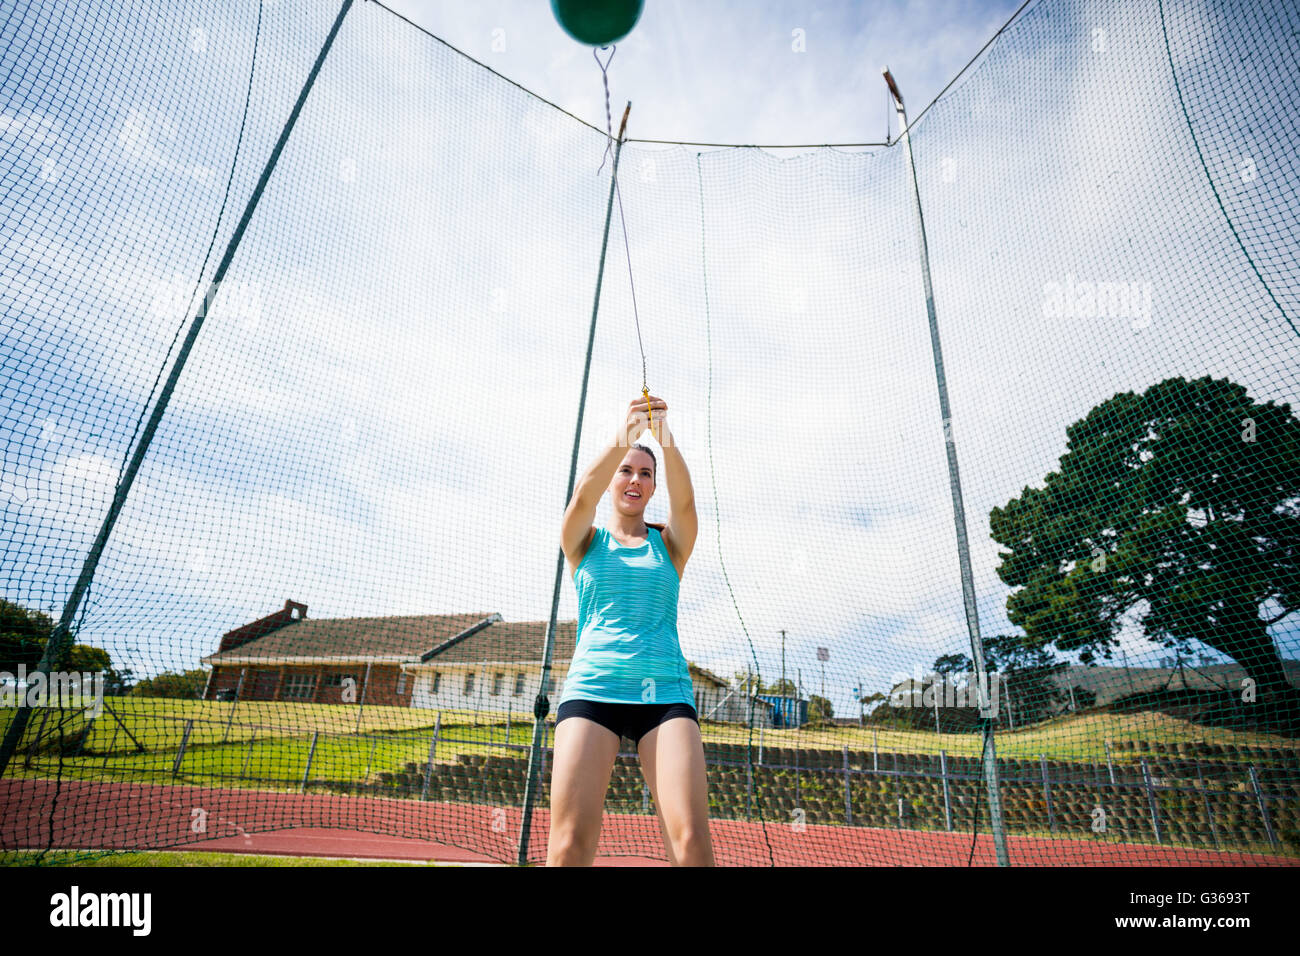 Athlete performing a hammer throw Stock Photo